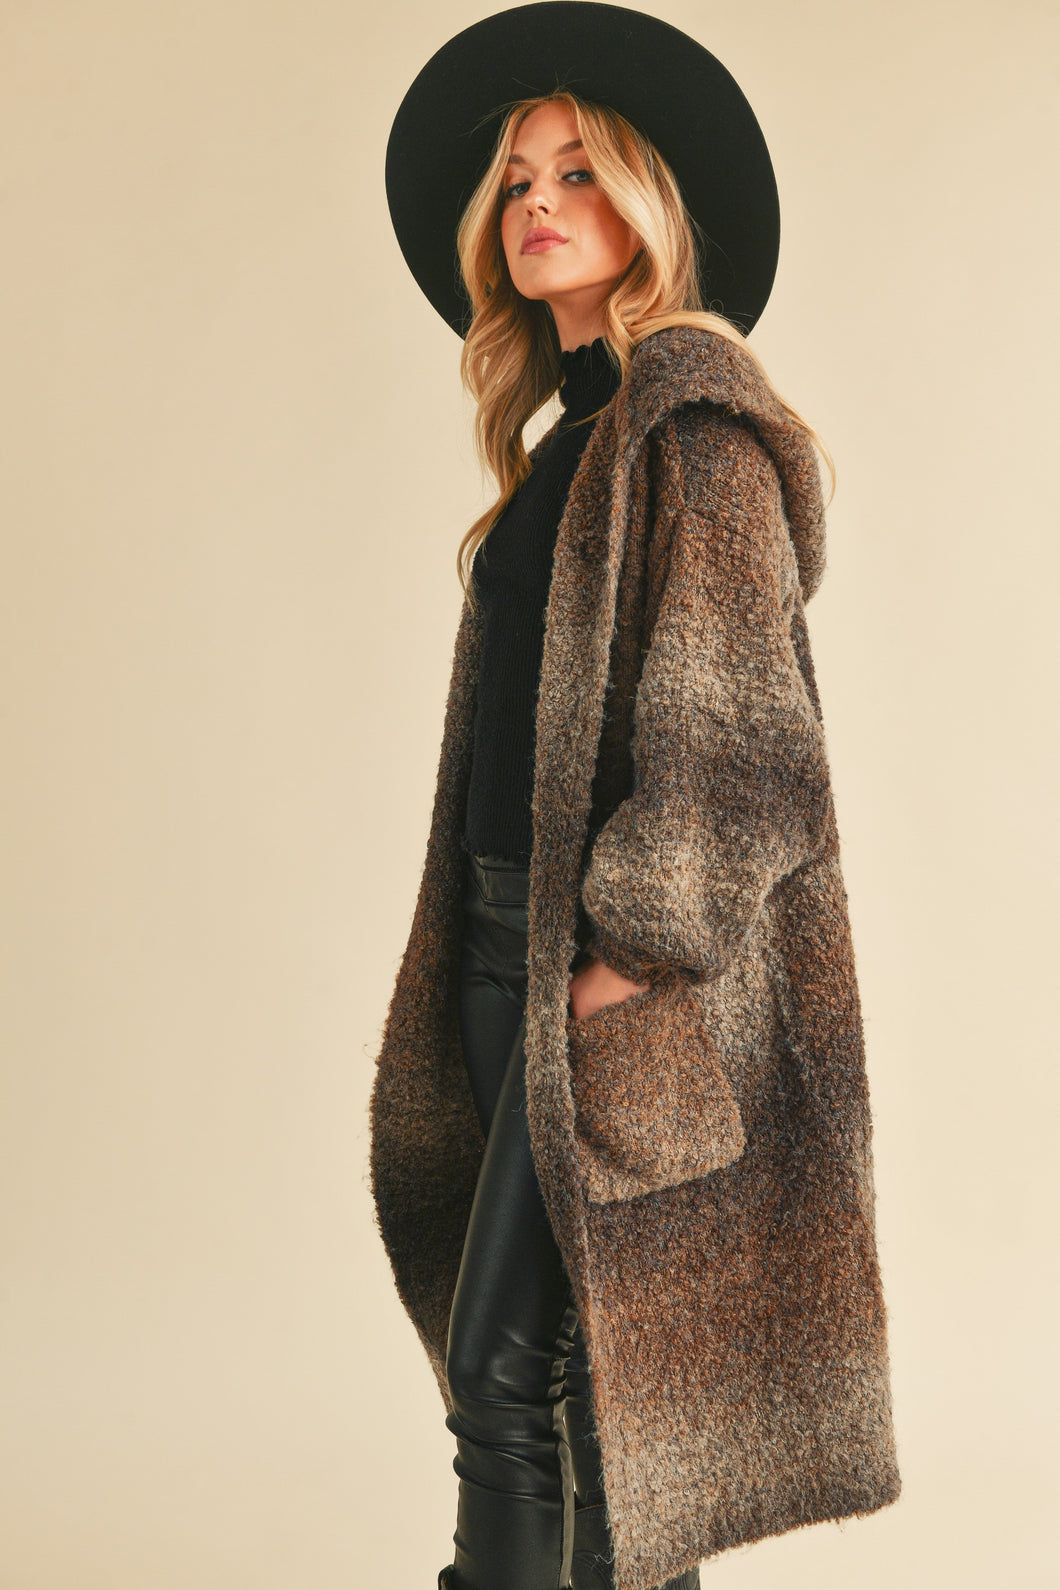 Nelly Hooded Wool Coat Cardigan